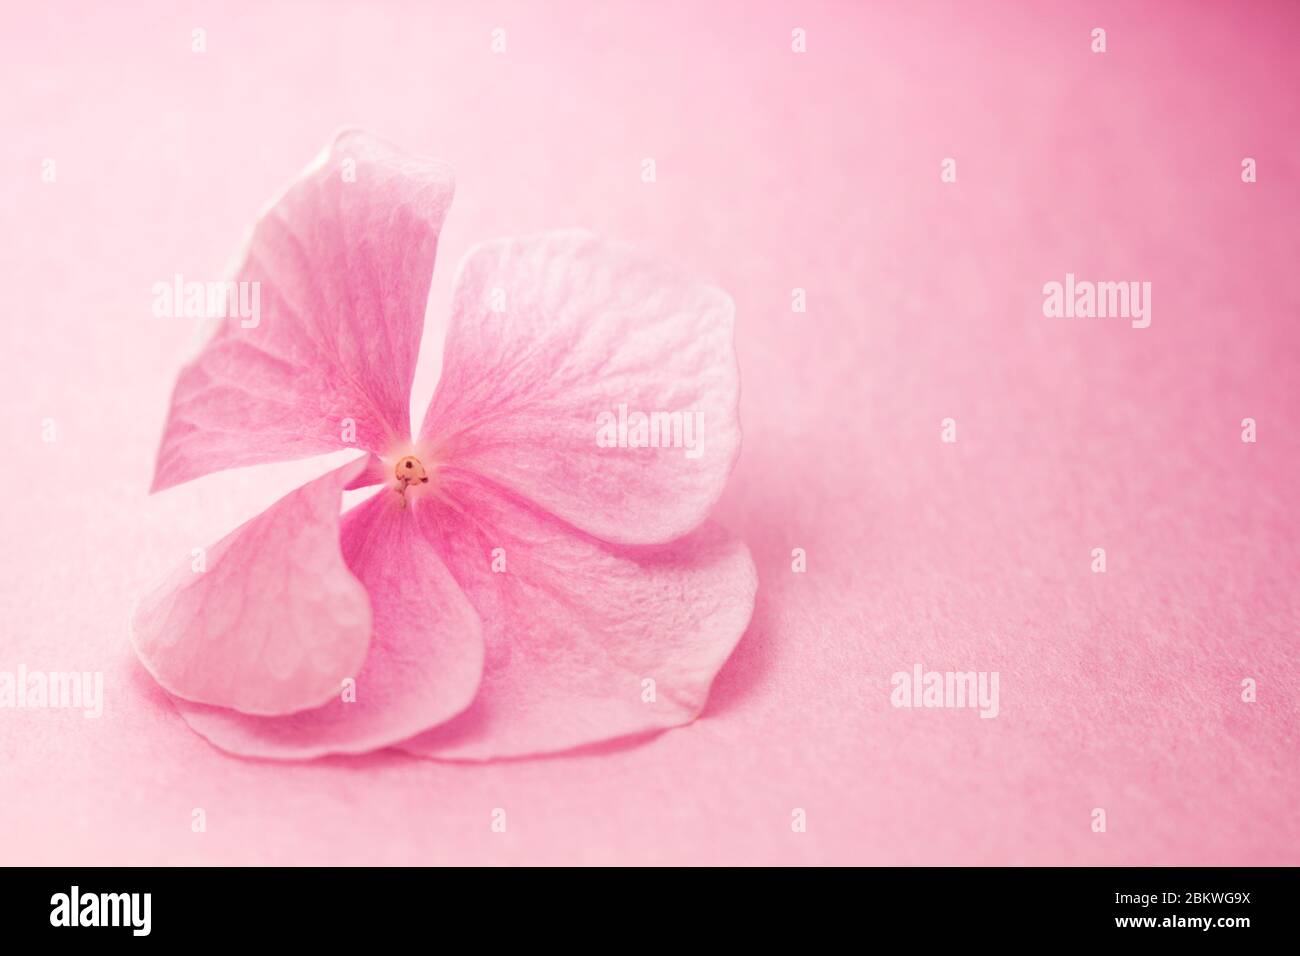 Delicate pink Hydrogena plant petals, blurred abstract background. The idea of tenderness, innocence and pristine. Stock image for Mother's day, for Stock Photo